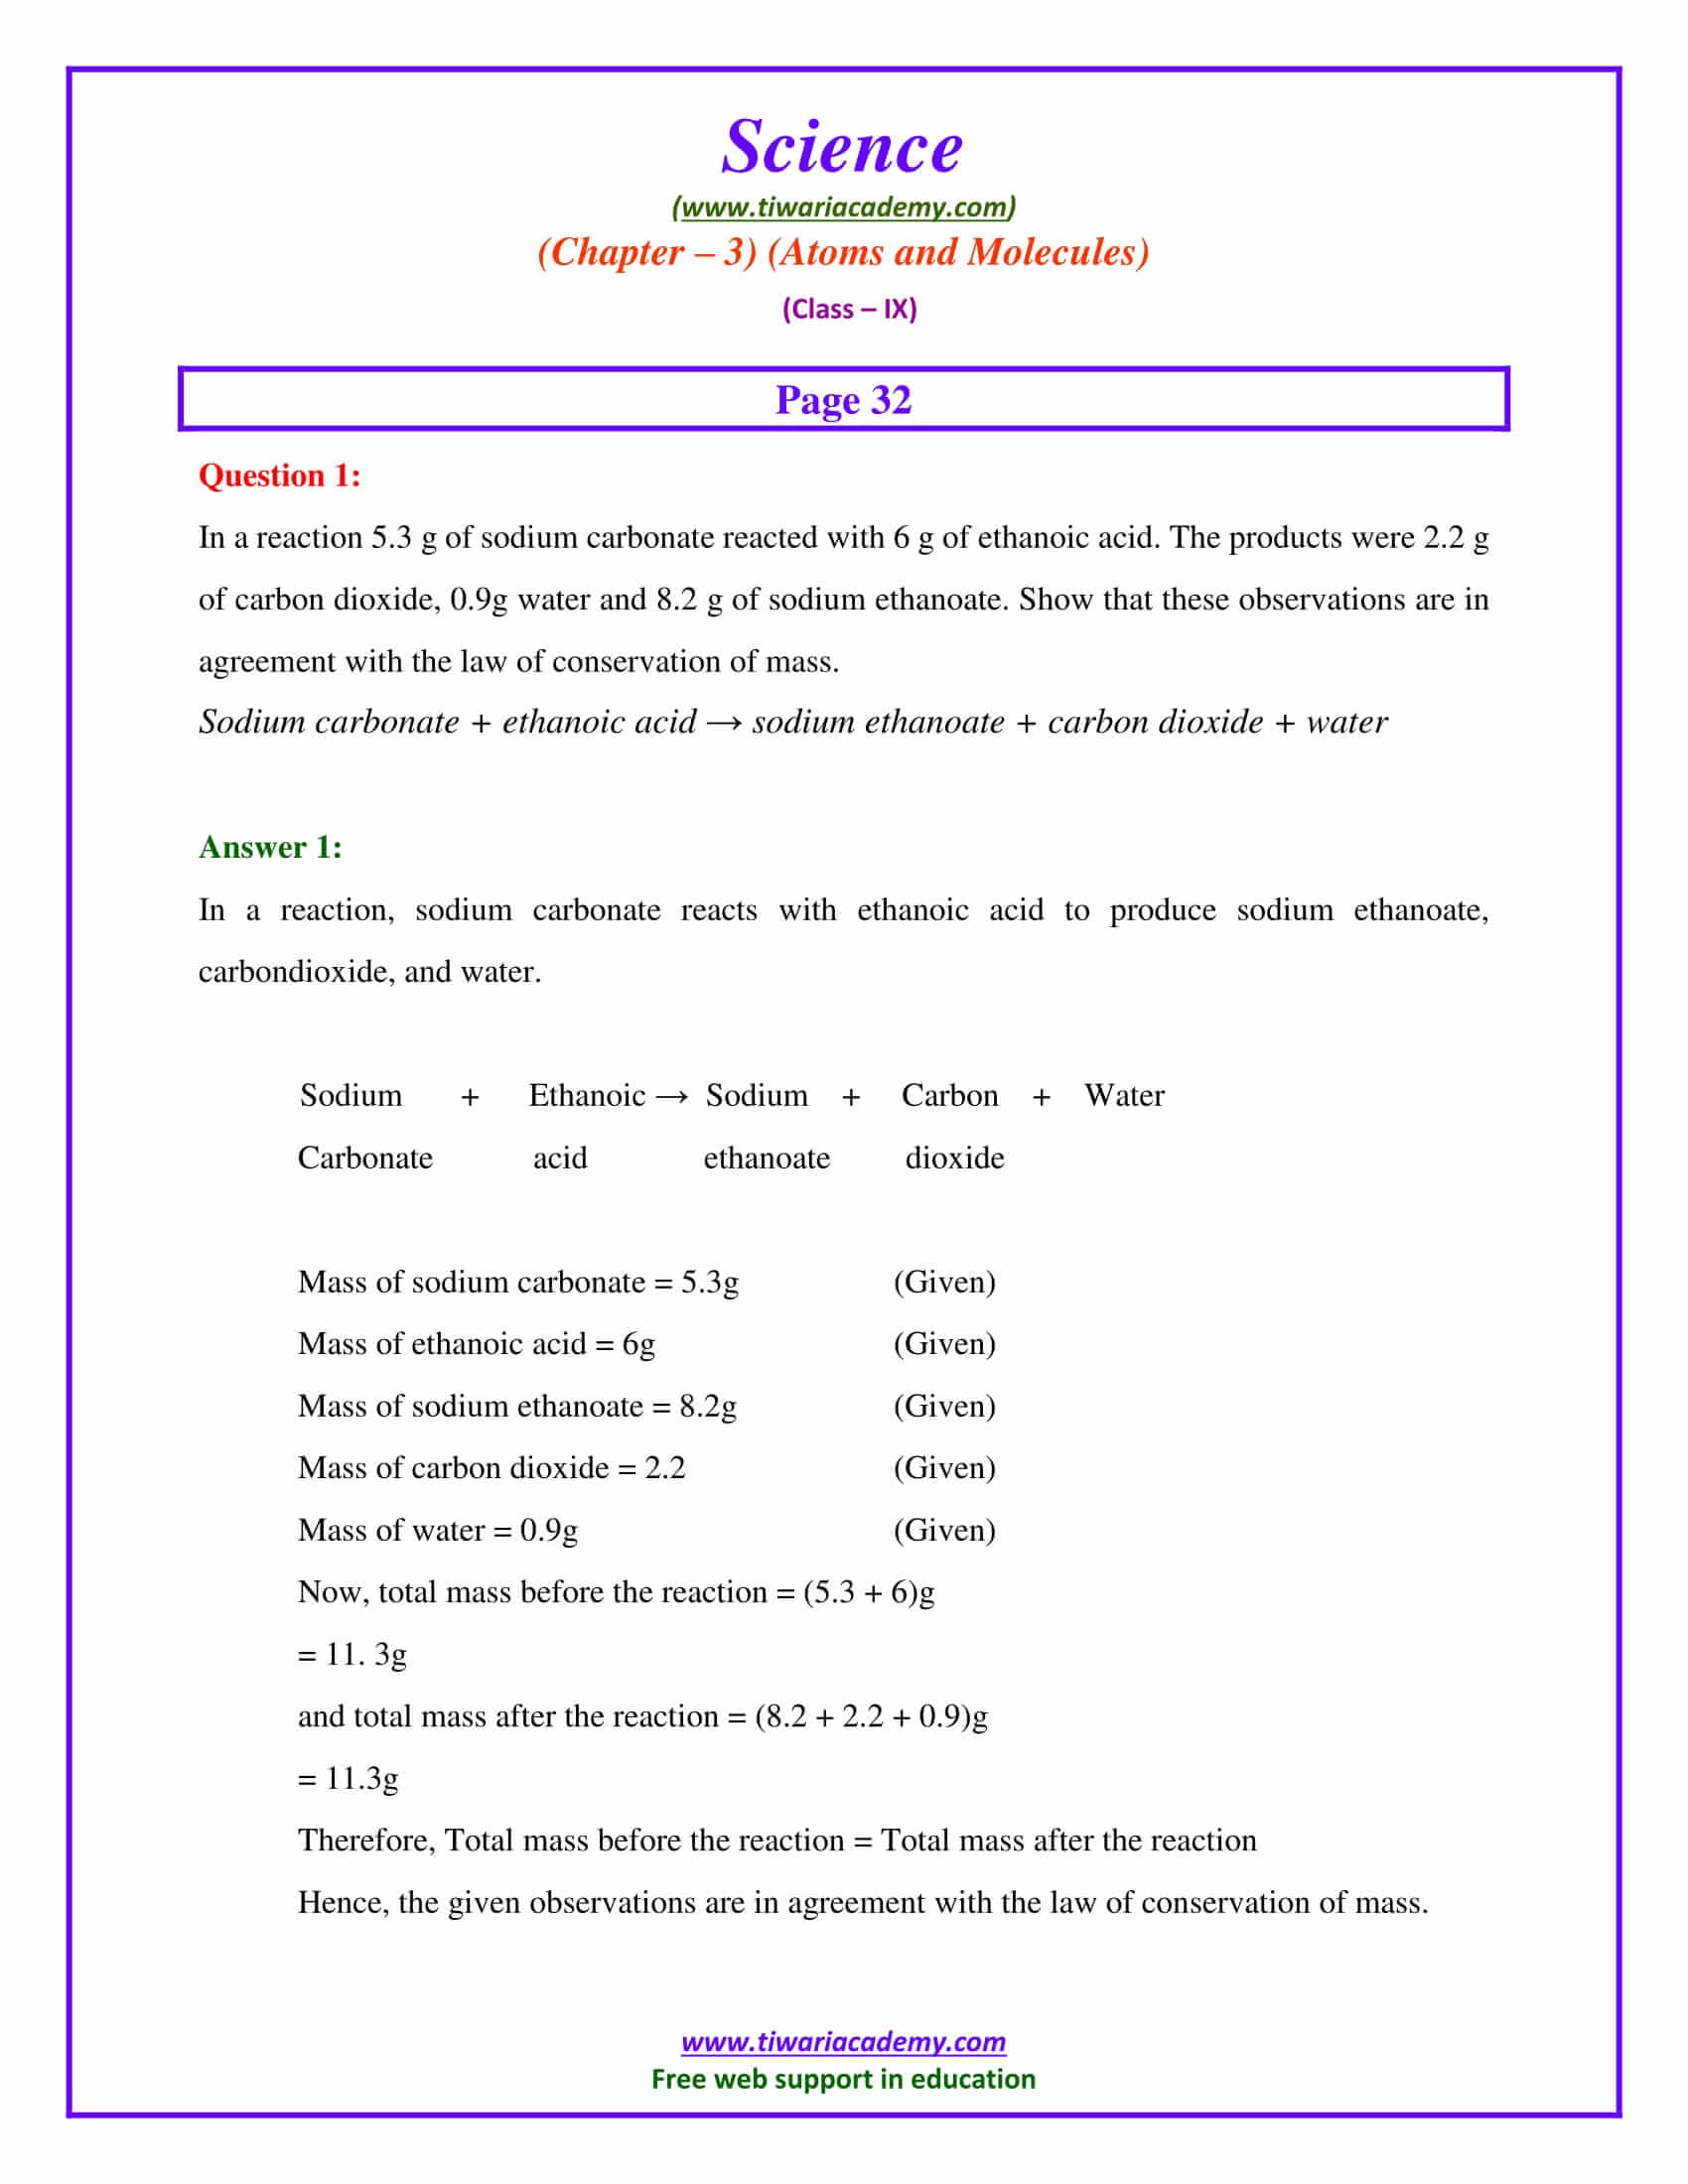 CBSE NCERT Solutions for Class 9 Science Chapter 3 Atoms and Molecules page 32